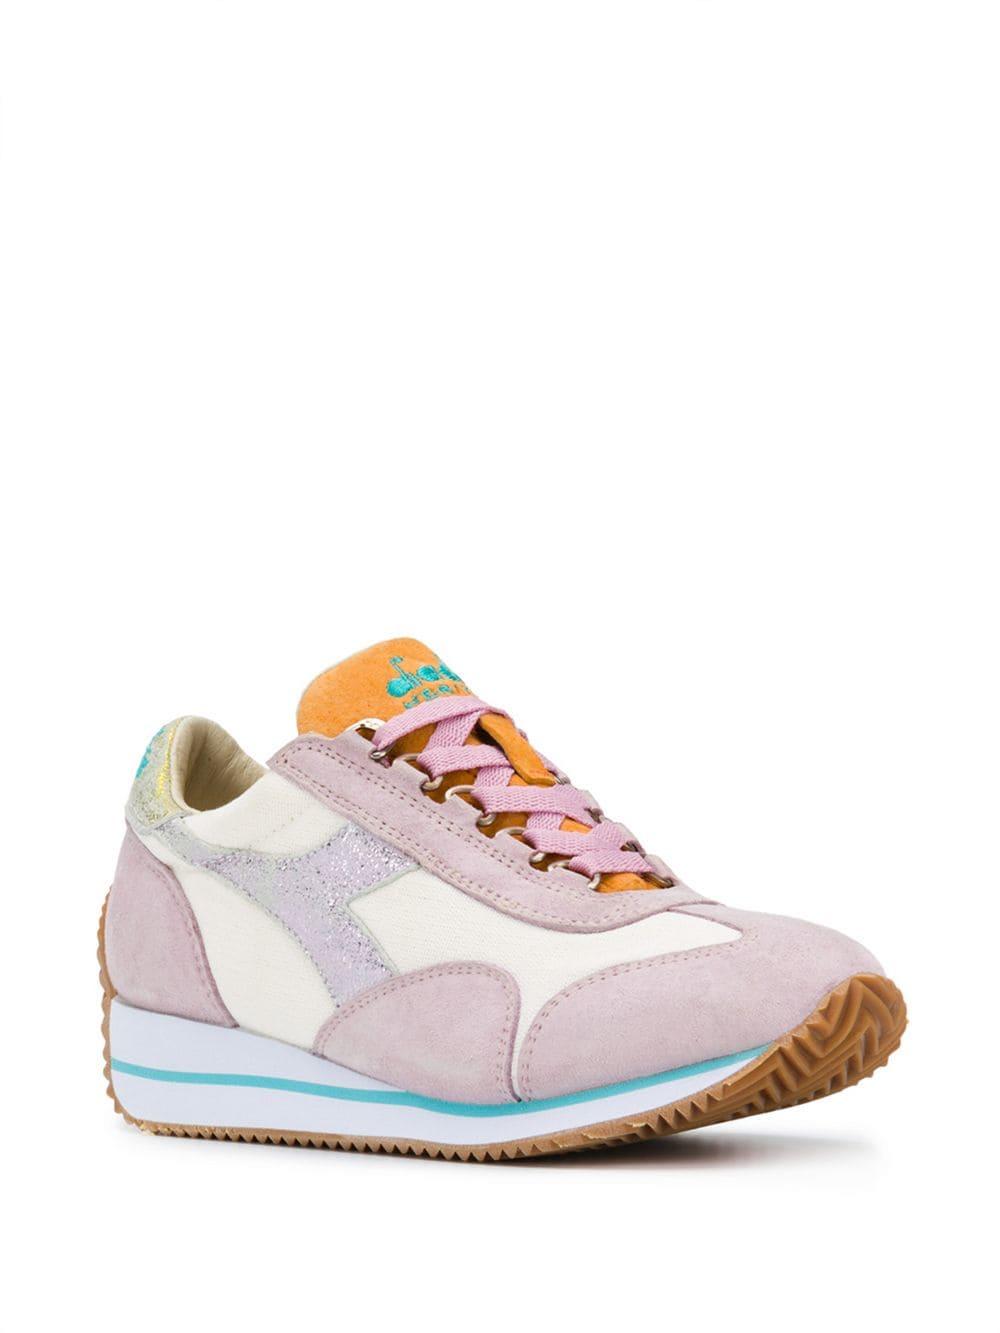 Diadora Equipe H Canvas Sw Evo Sneakers in Pink - Lyst